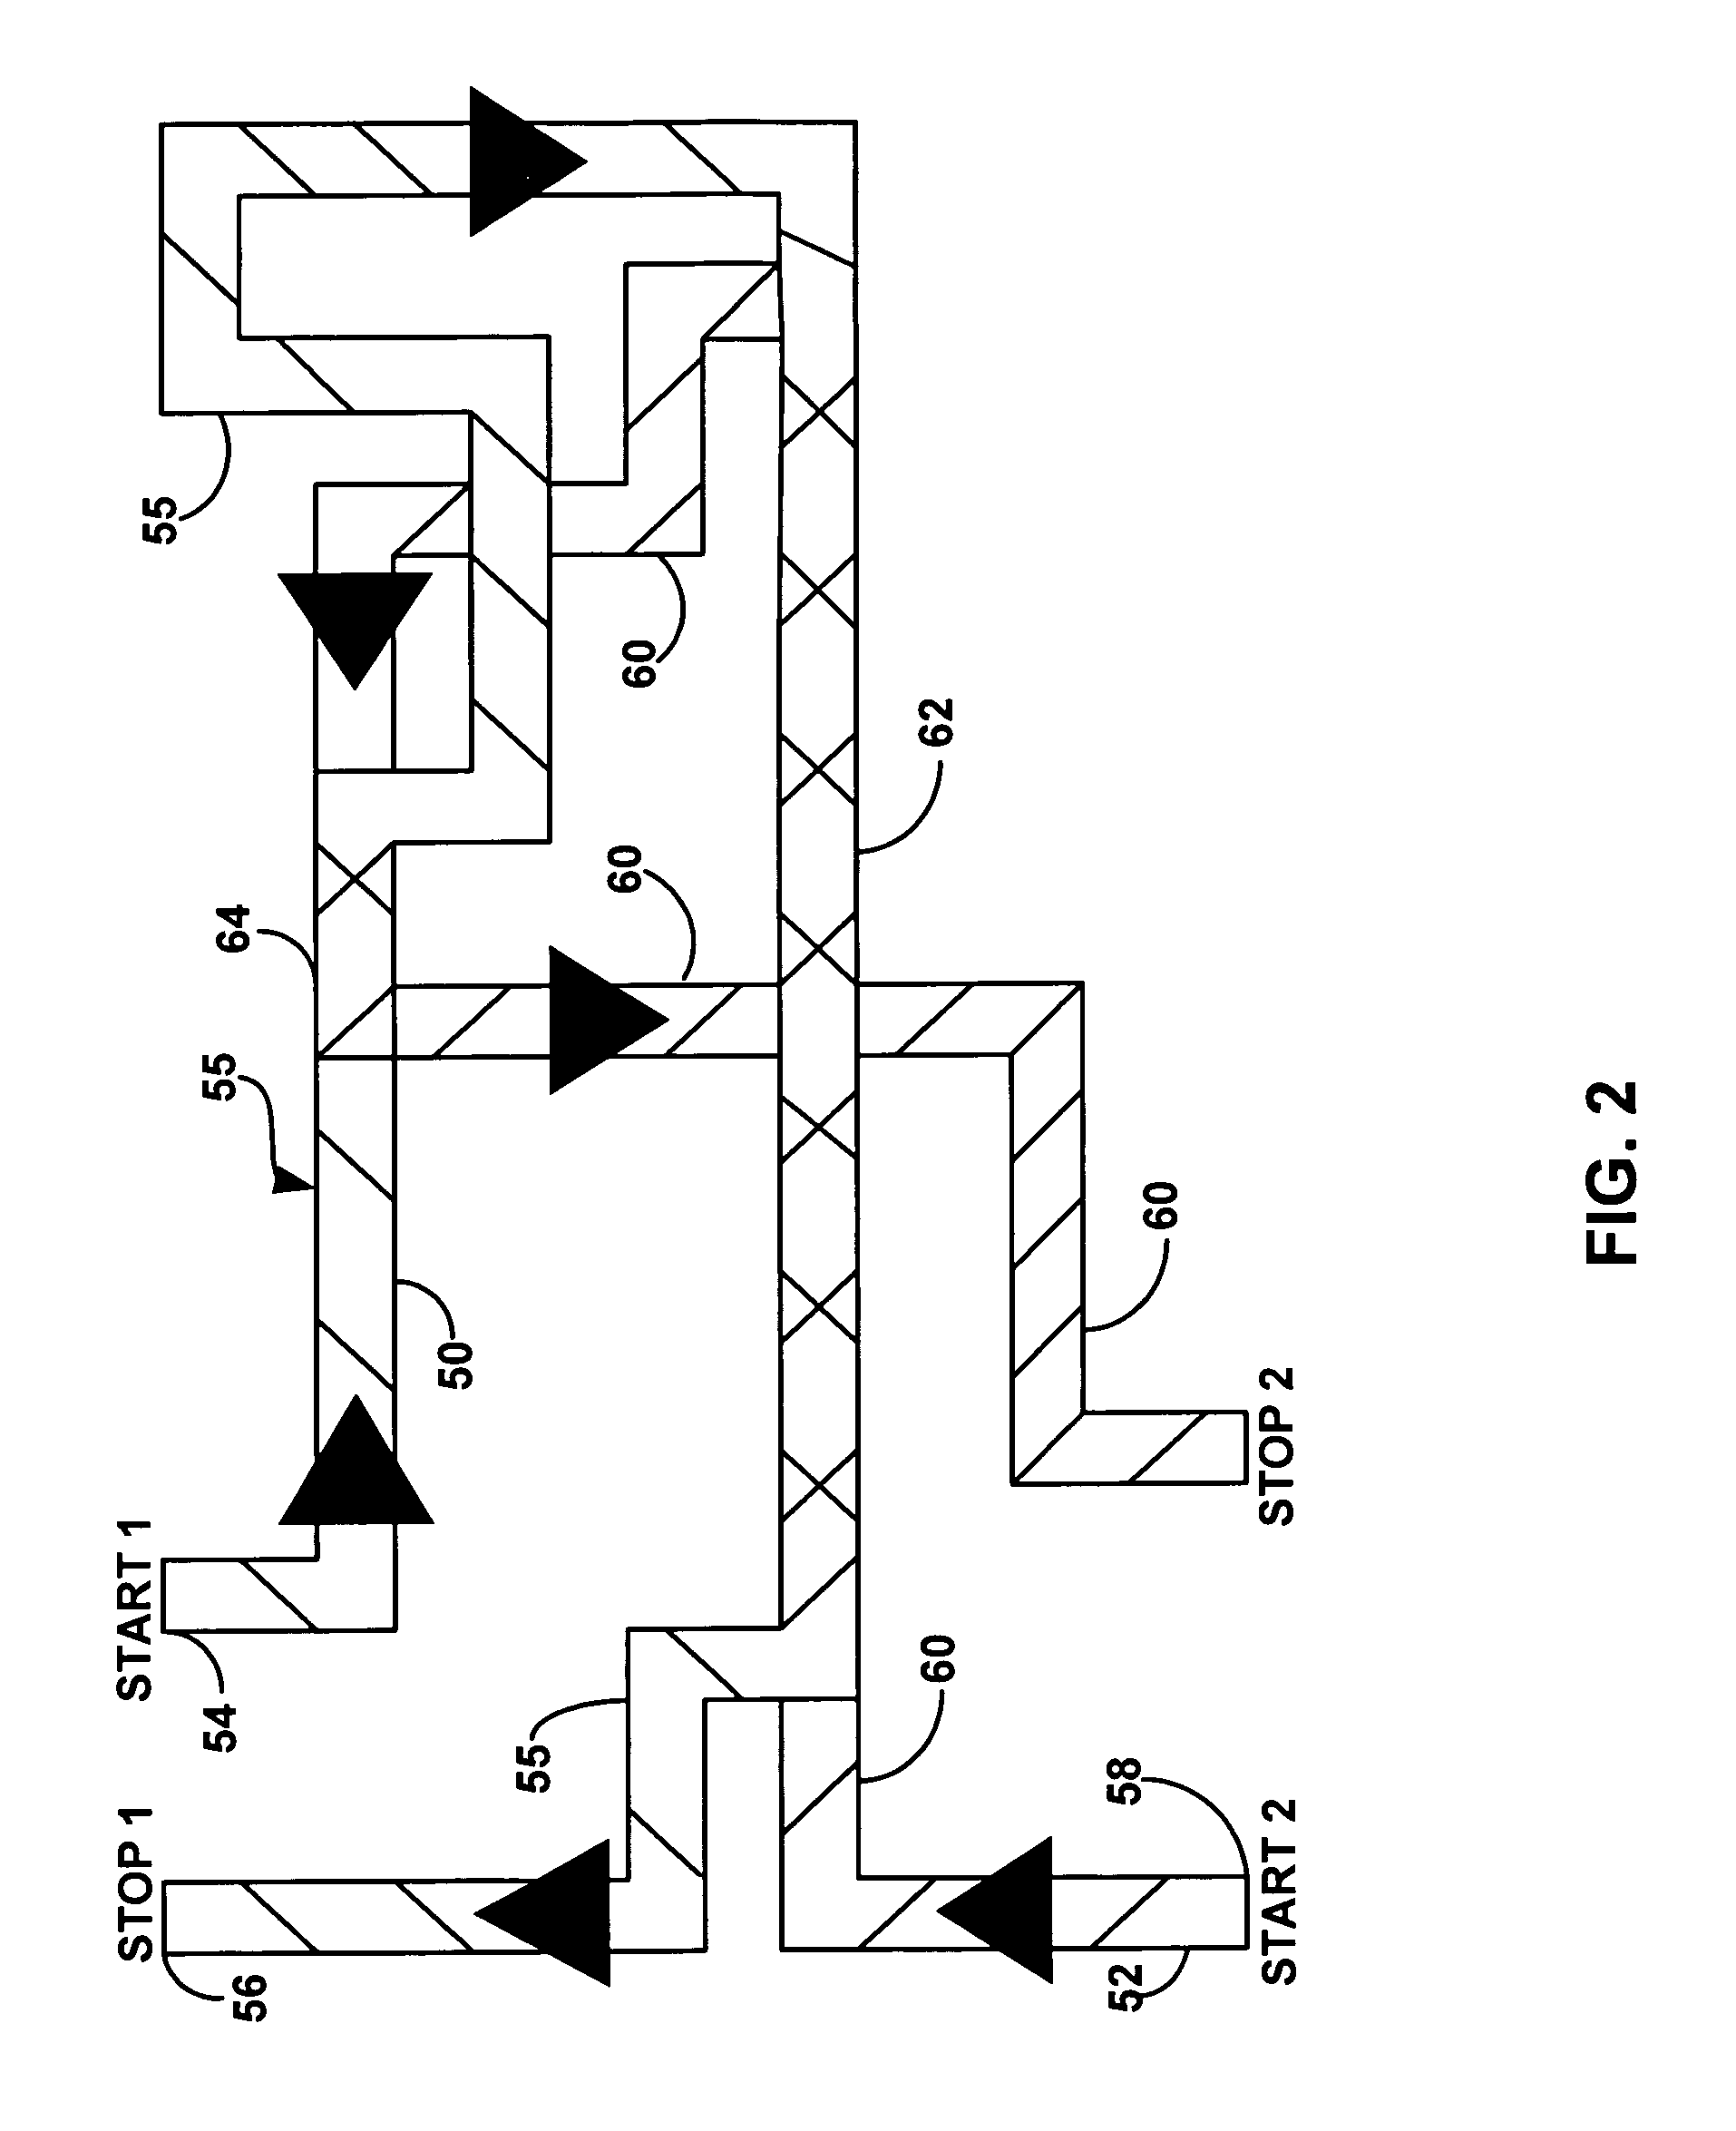 Method and system for automatic analysis and management of drive test routes